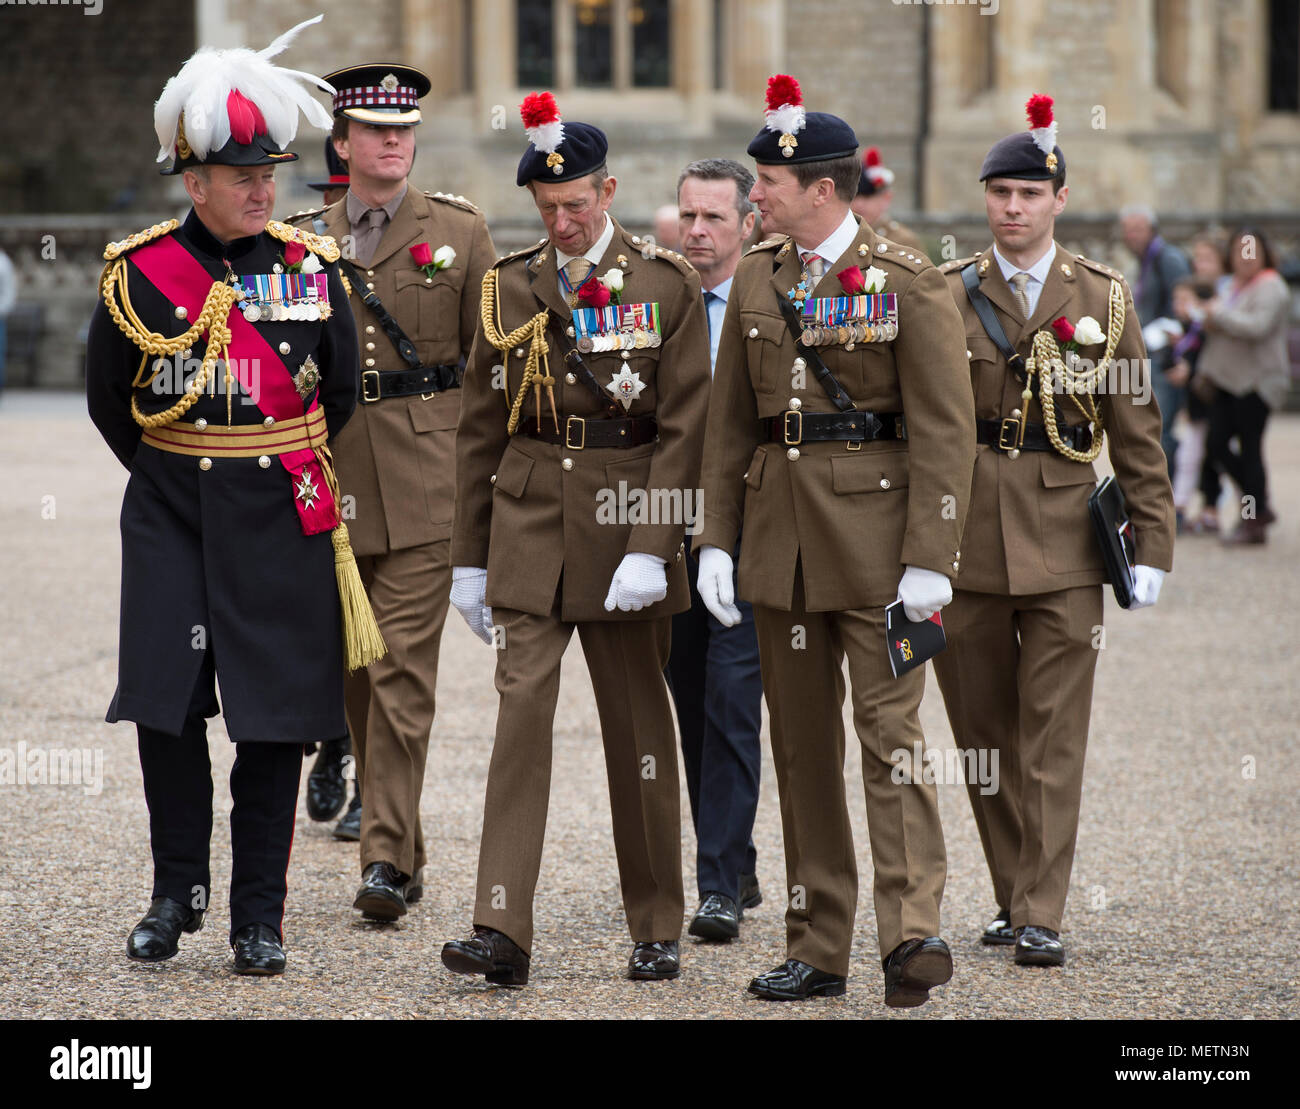 Tower of London, UK. 23 April, 2018. The Royal Regiment of Fusiliers have been granted permission to guard the Tower of London, their Regimental Headquarters, for 48 hours on their 50th anniversary with HRH the Duke of Kent, Colonel in Chief of the Fusiliers, attending a special thanksgiving service with invited guests. Credit: Malcolm Park/Alamy Live News. Stock Photo